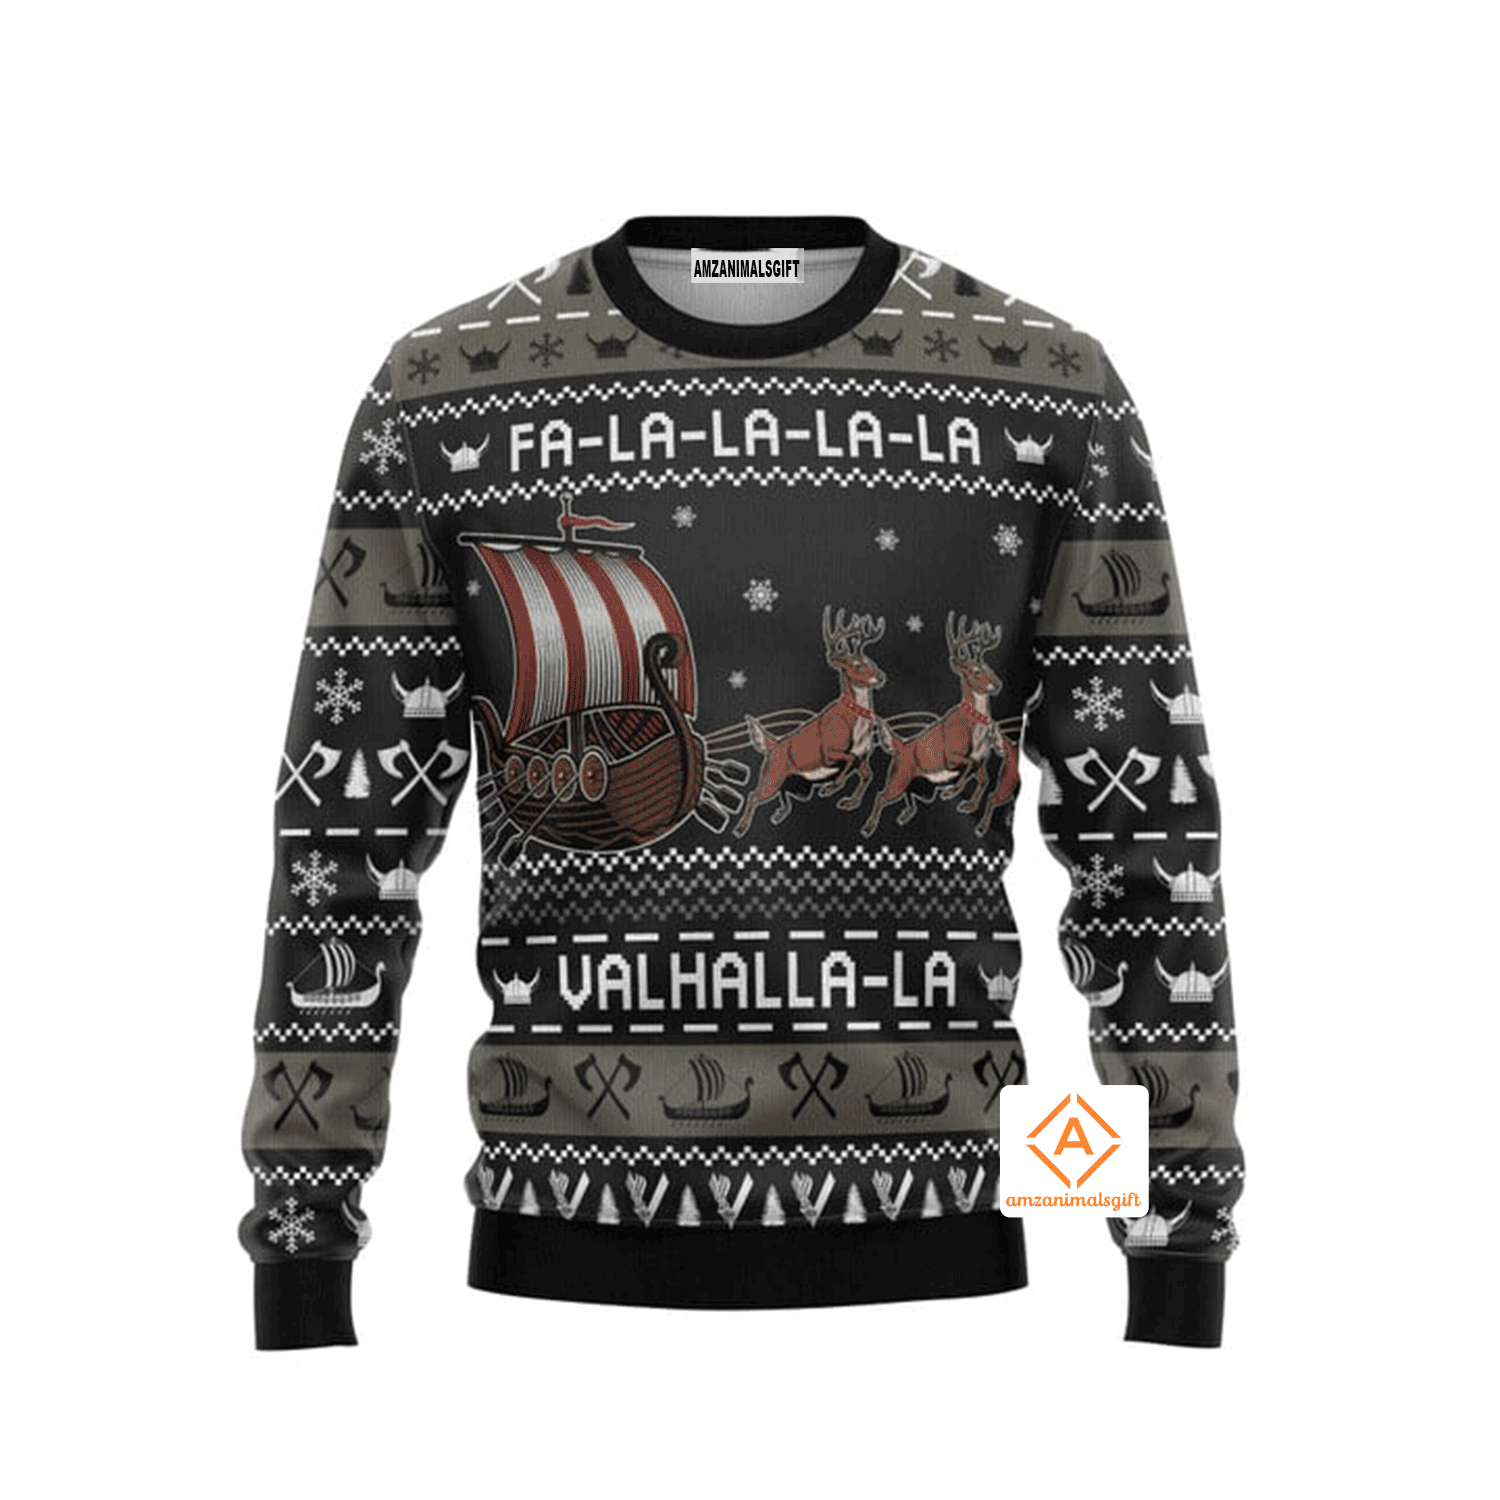 Fa-la-la-valhalla Viking Christmas Sweater, Ugly Sweater For Men & Women, Perfect Outfit For Christmas New Year Autumn Winter